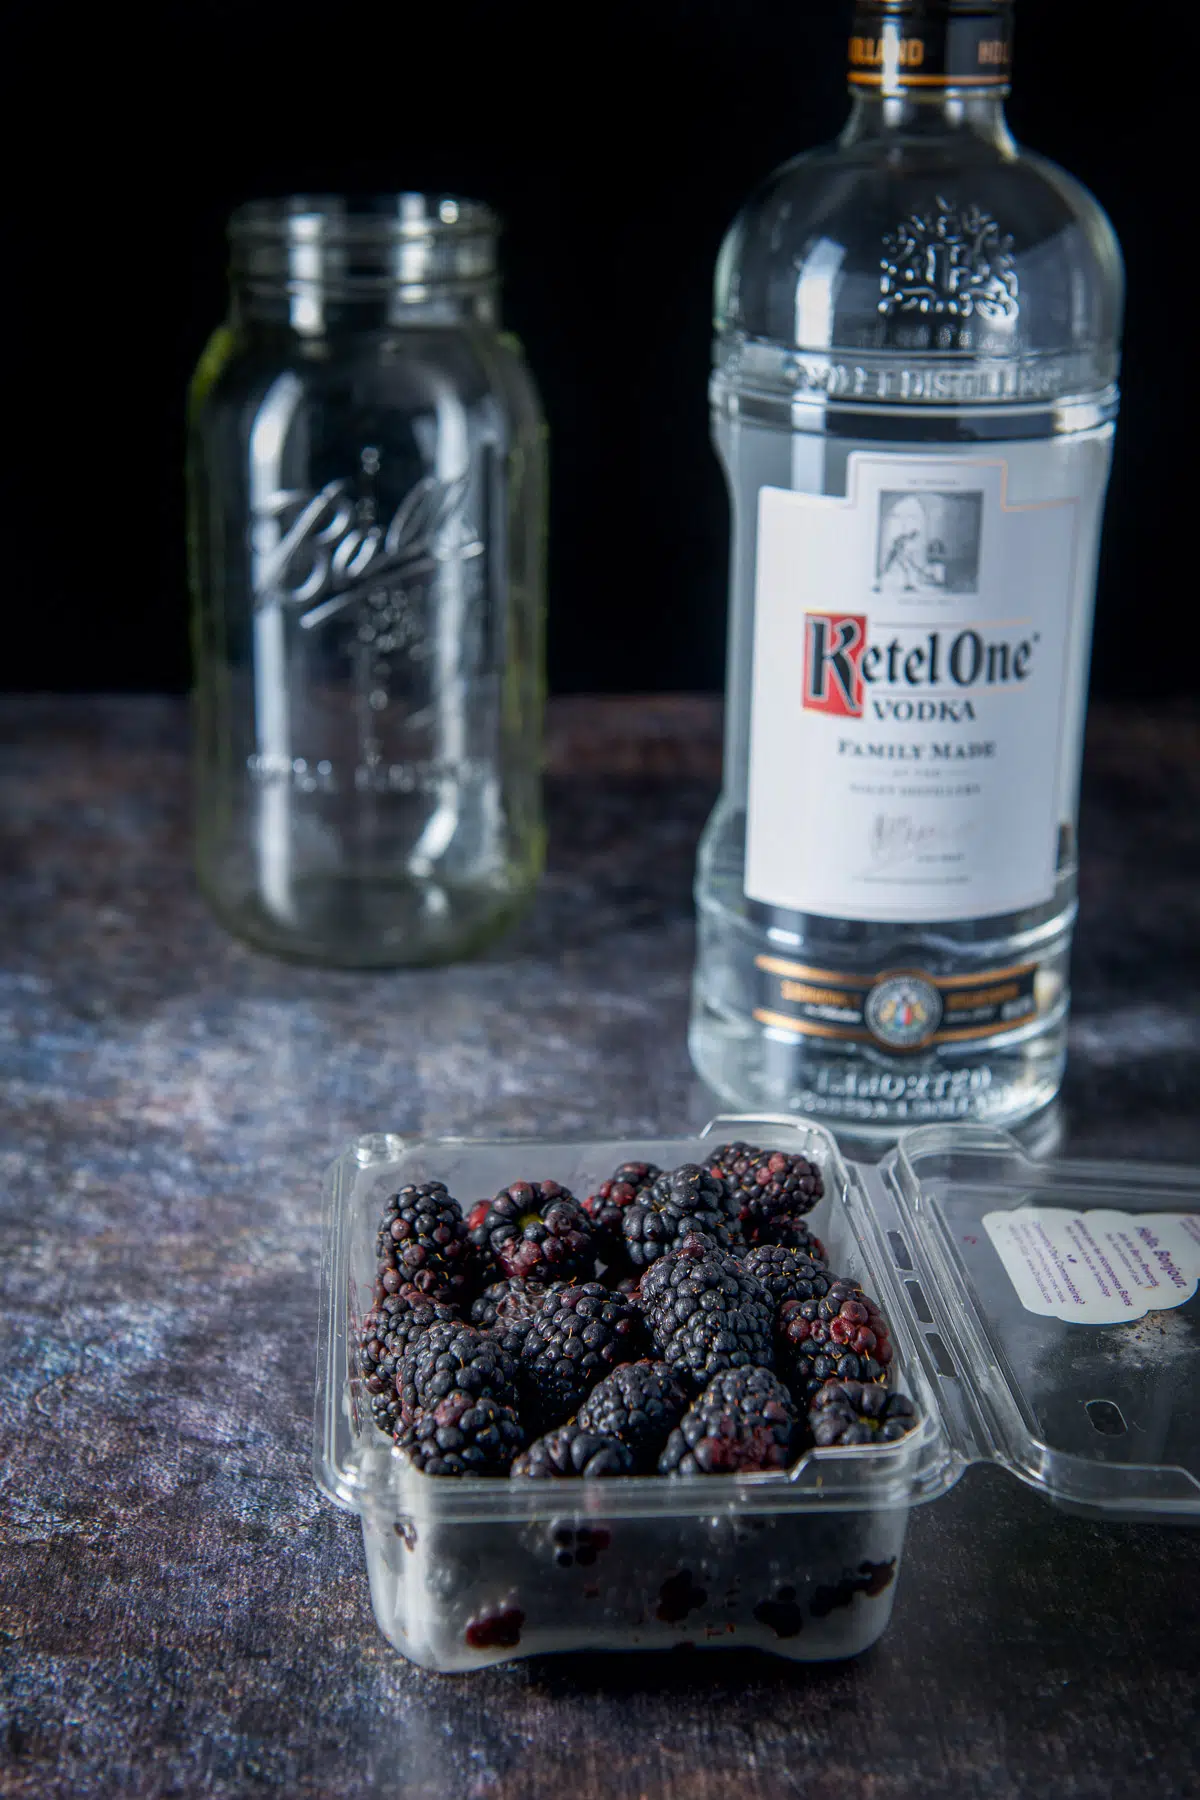 A plastic container of blackberries, bottle of vodka and a jar